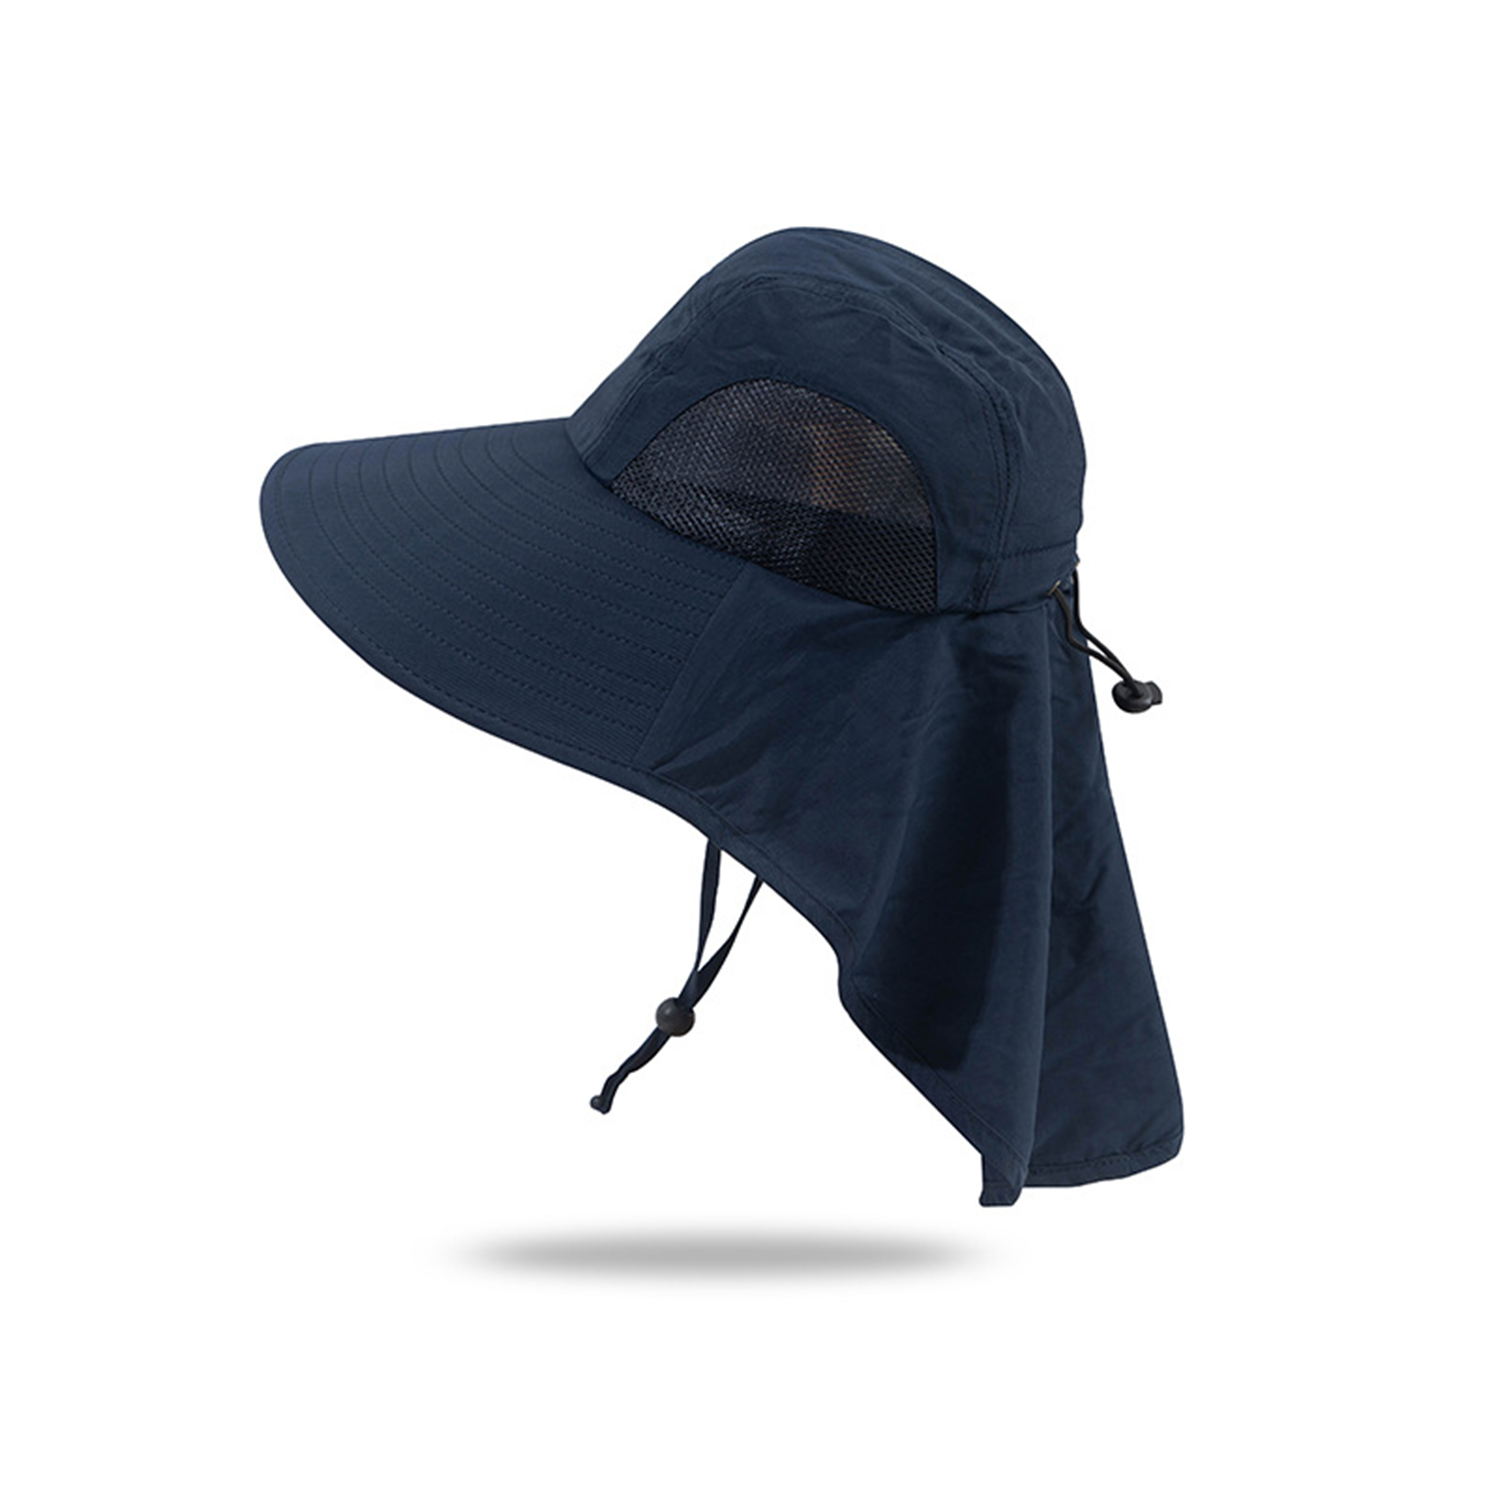 Outdoor Fishing Hat - Sun Protection, Face and Neck Shield, Breathable Wide Brim, Perfect for Hiking Navy Blue